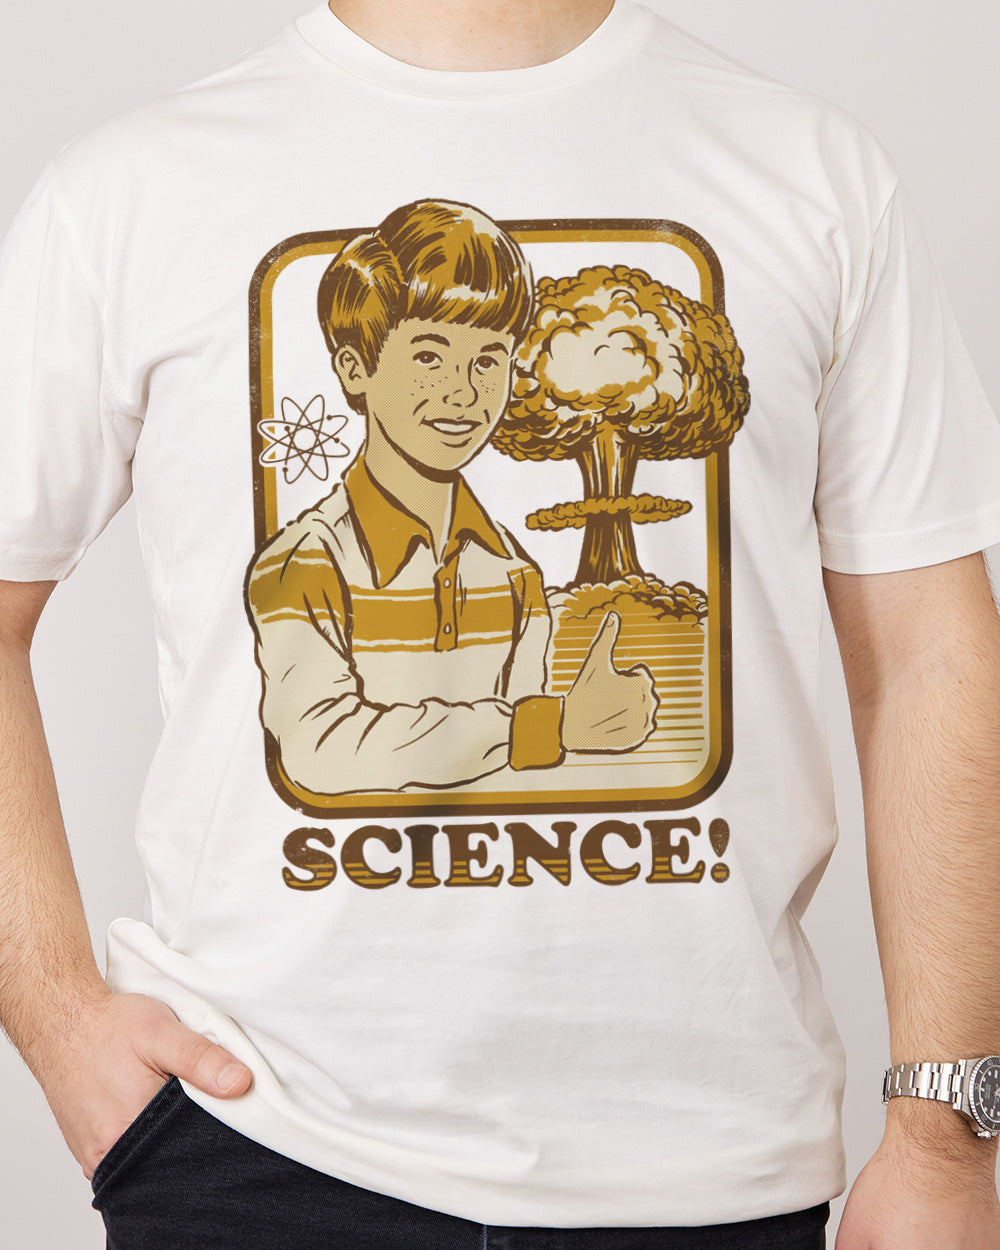 Science! T-Shirt